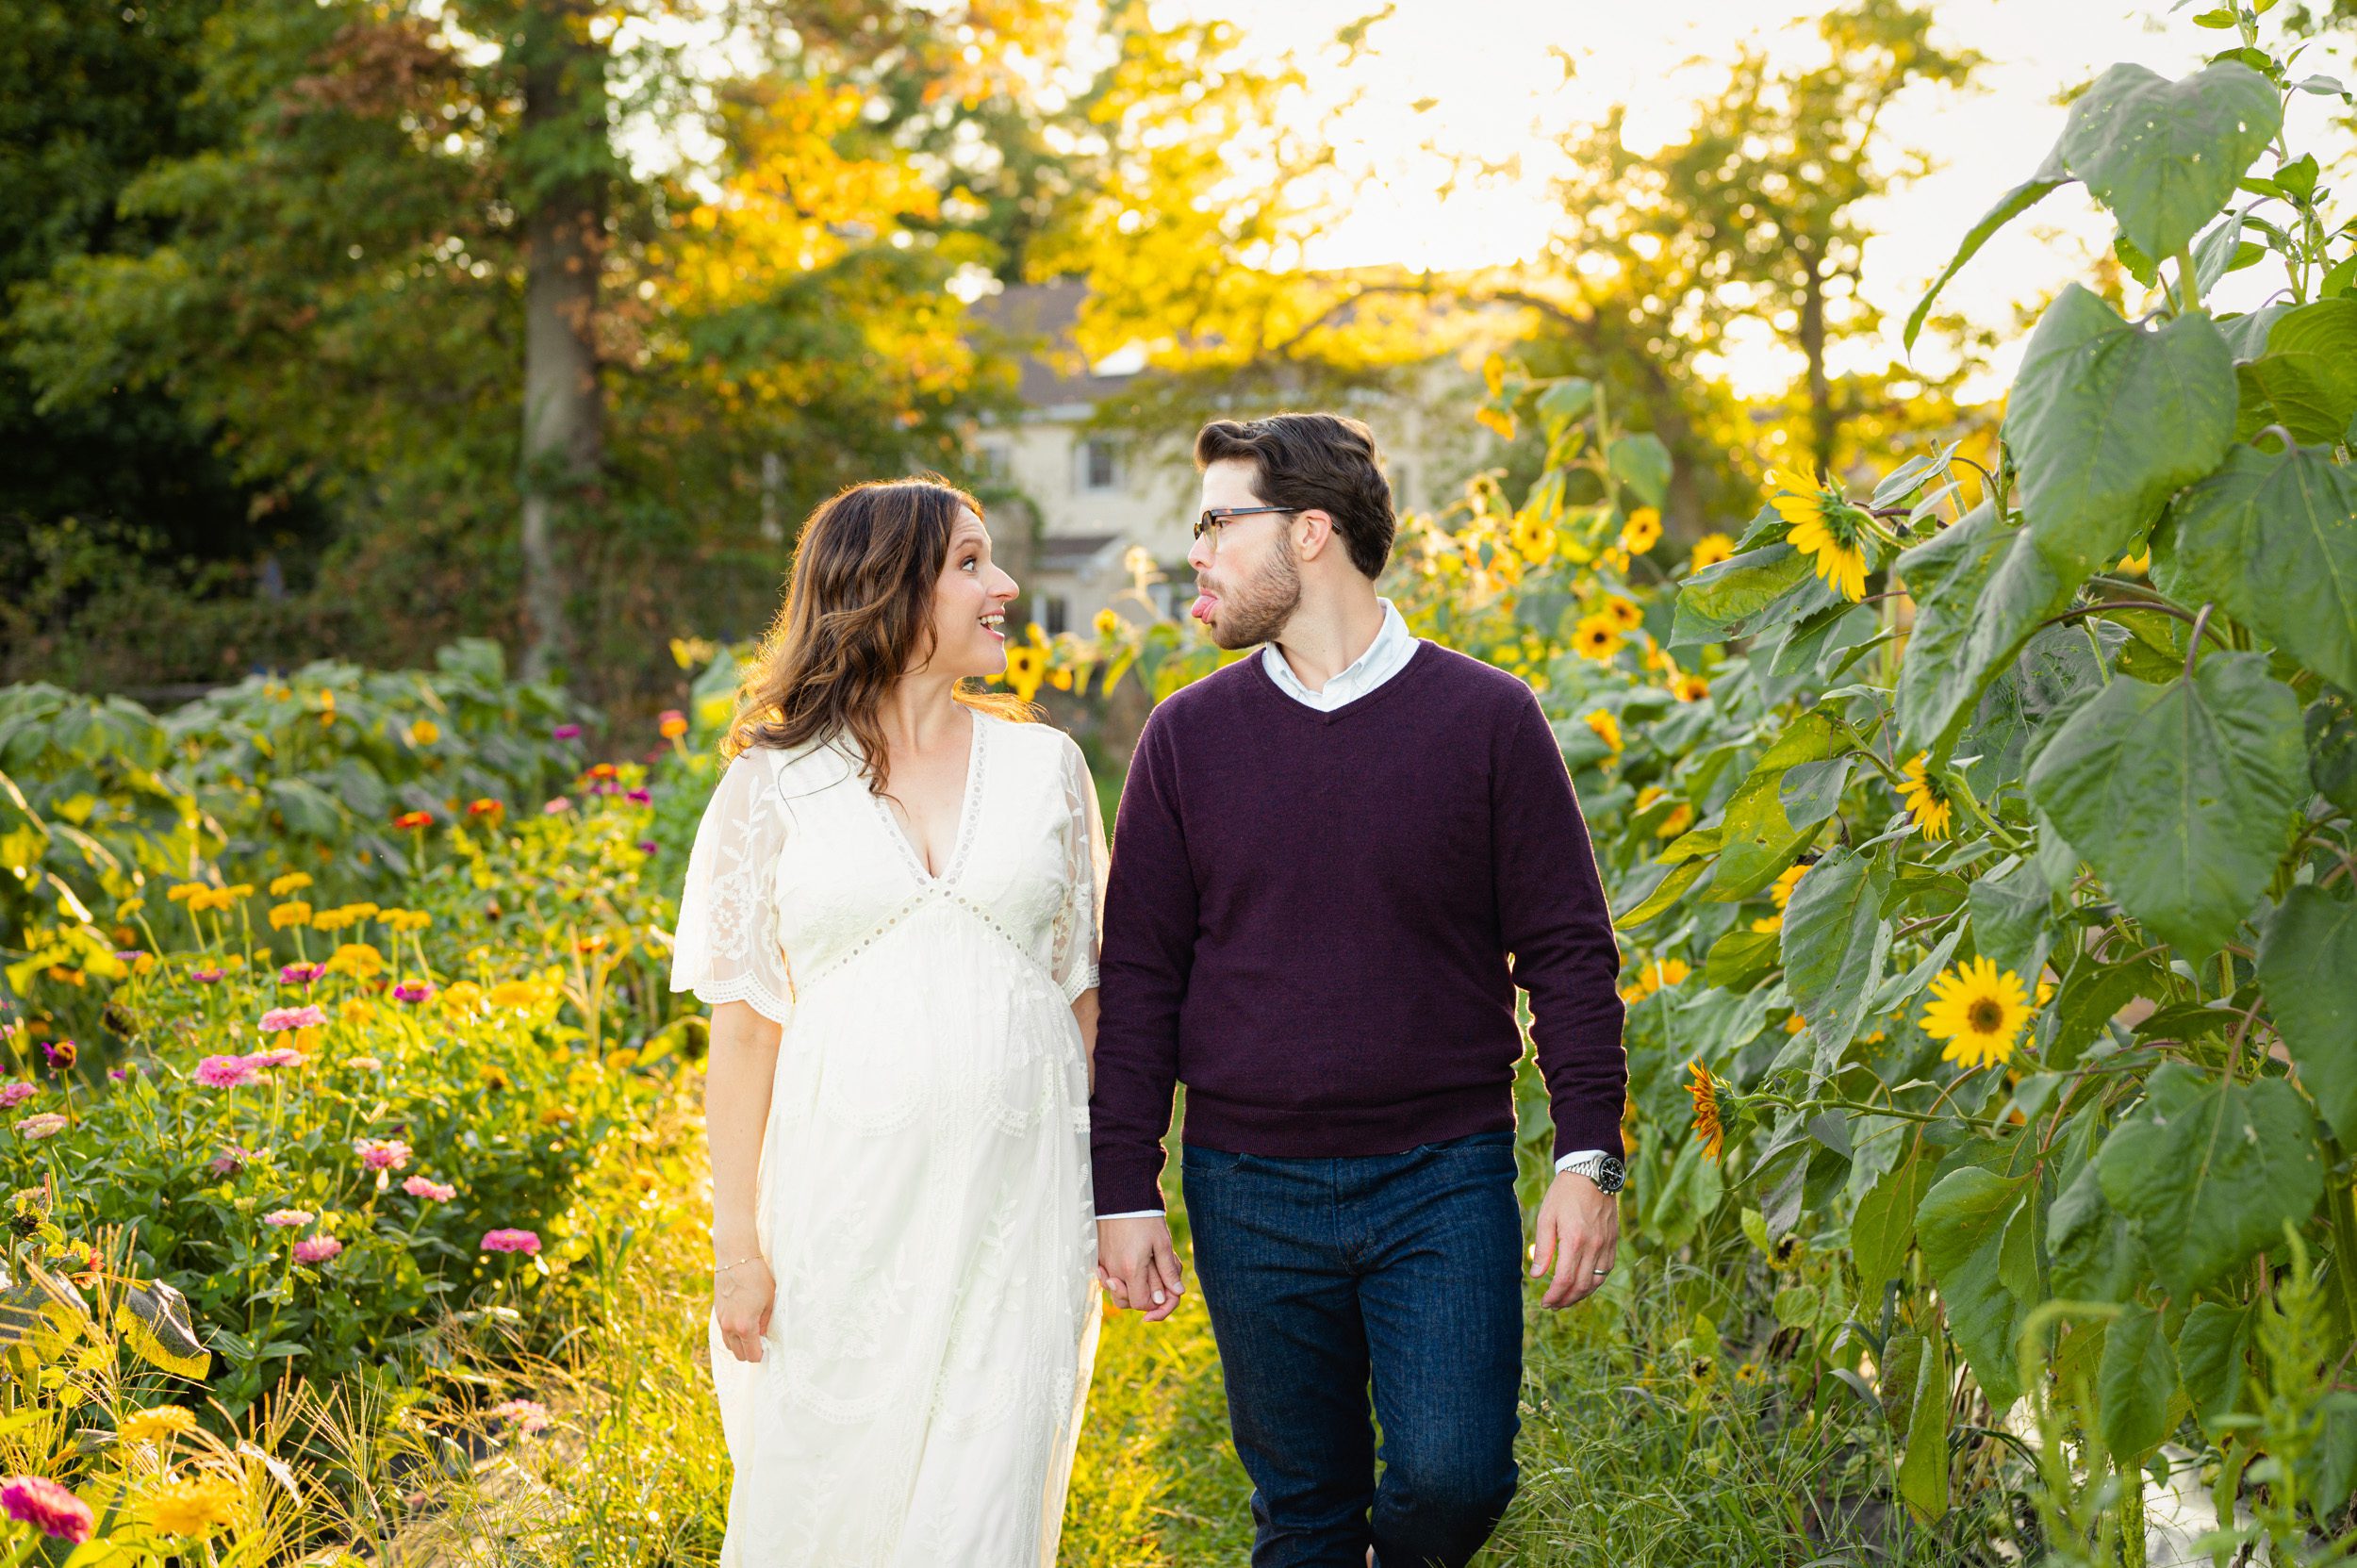 an expecting couple walking through a field of sunflowers and wildflowers while they make silly faces at each other during a maternity photoshoot